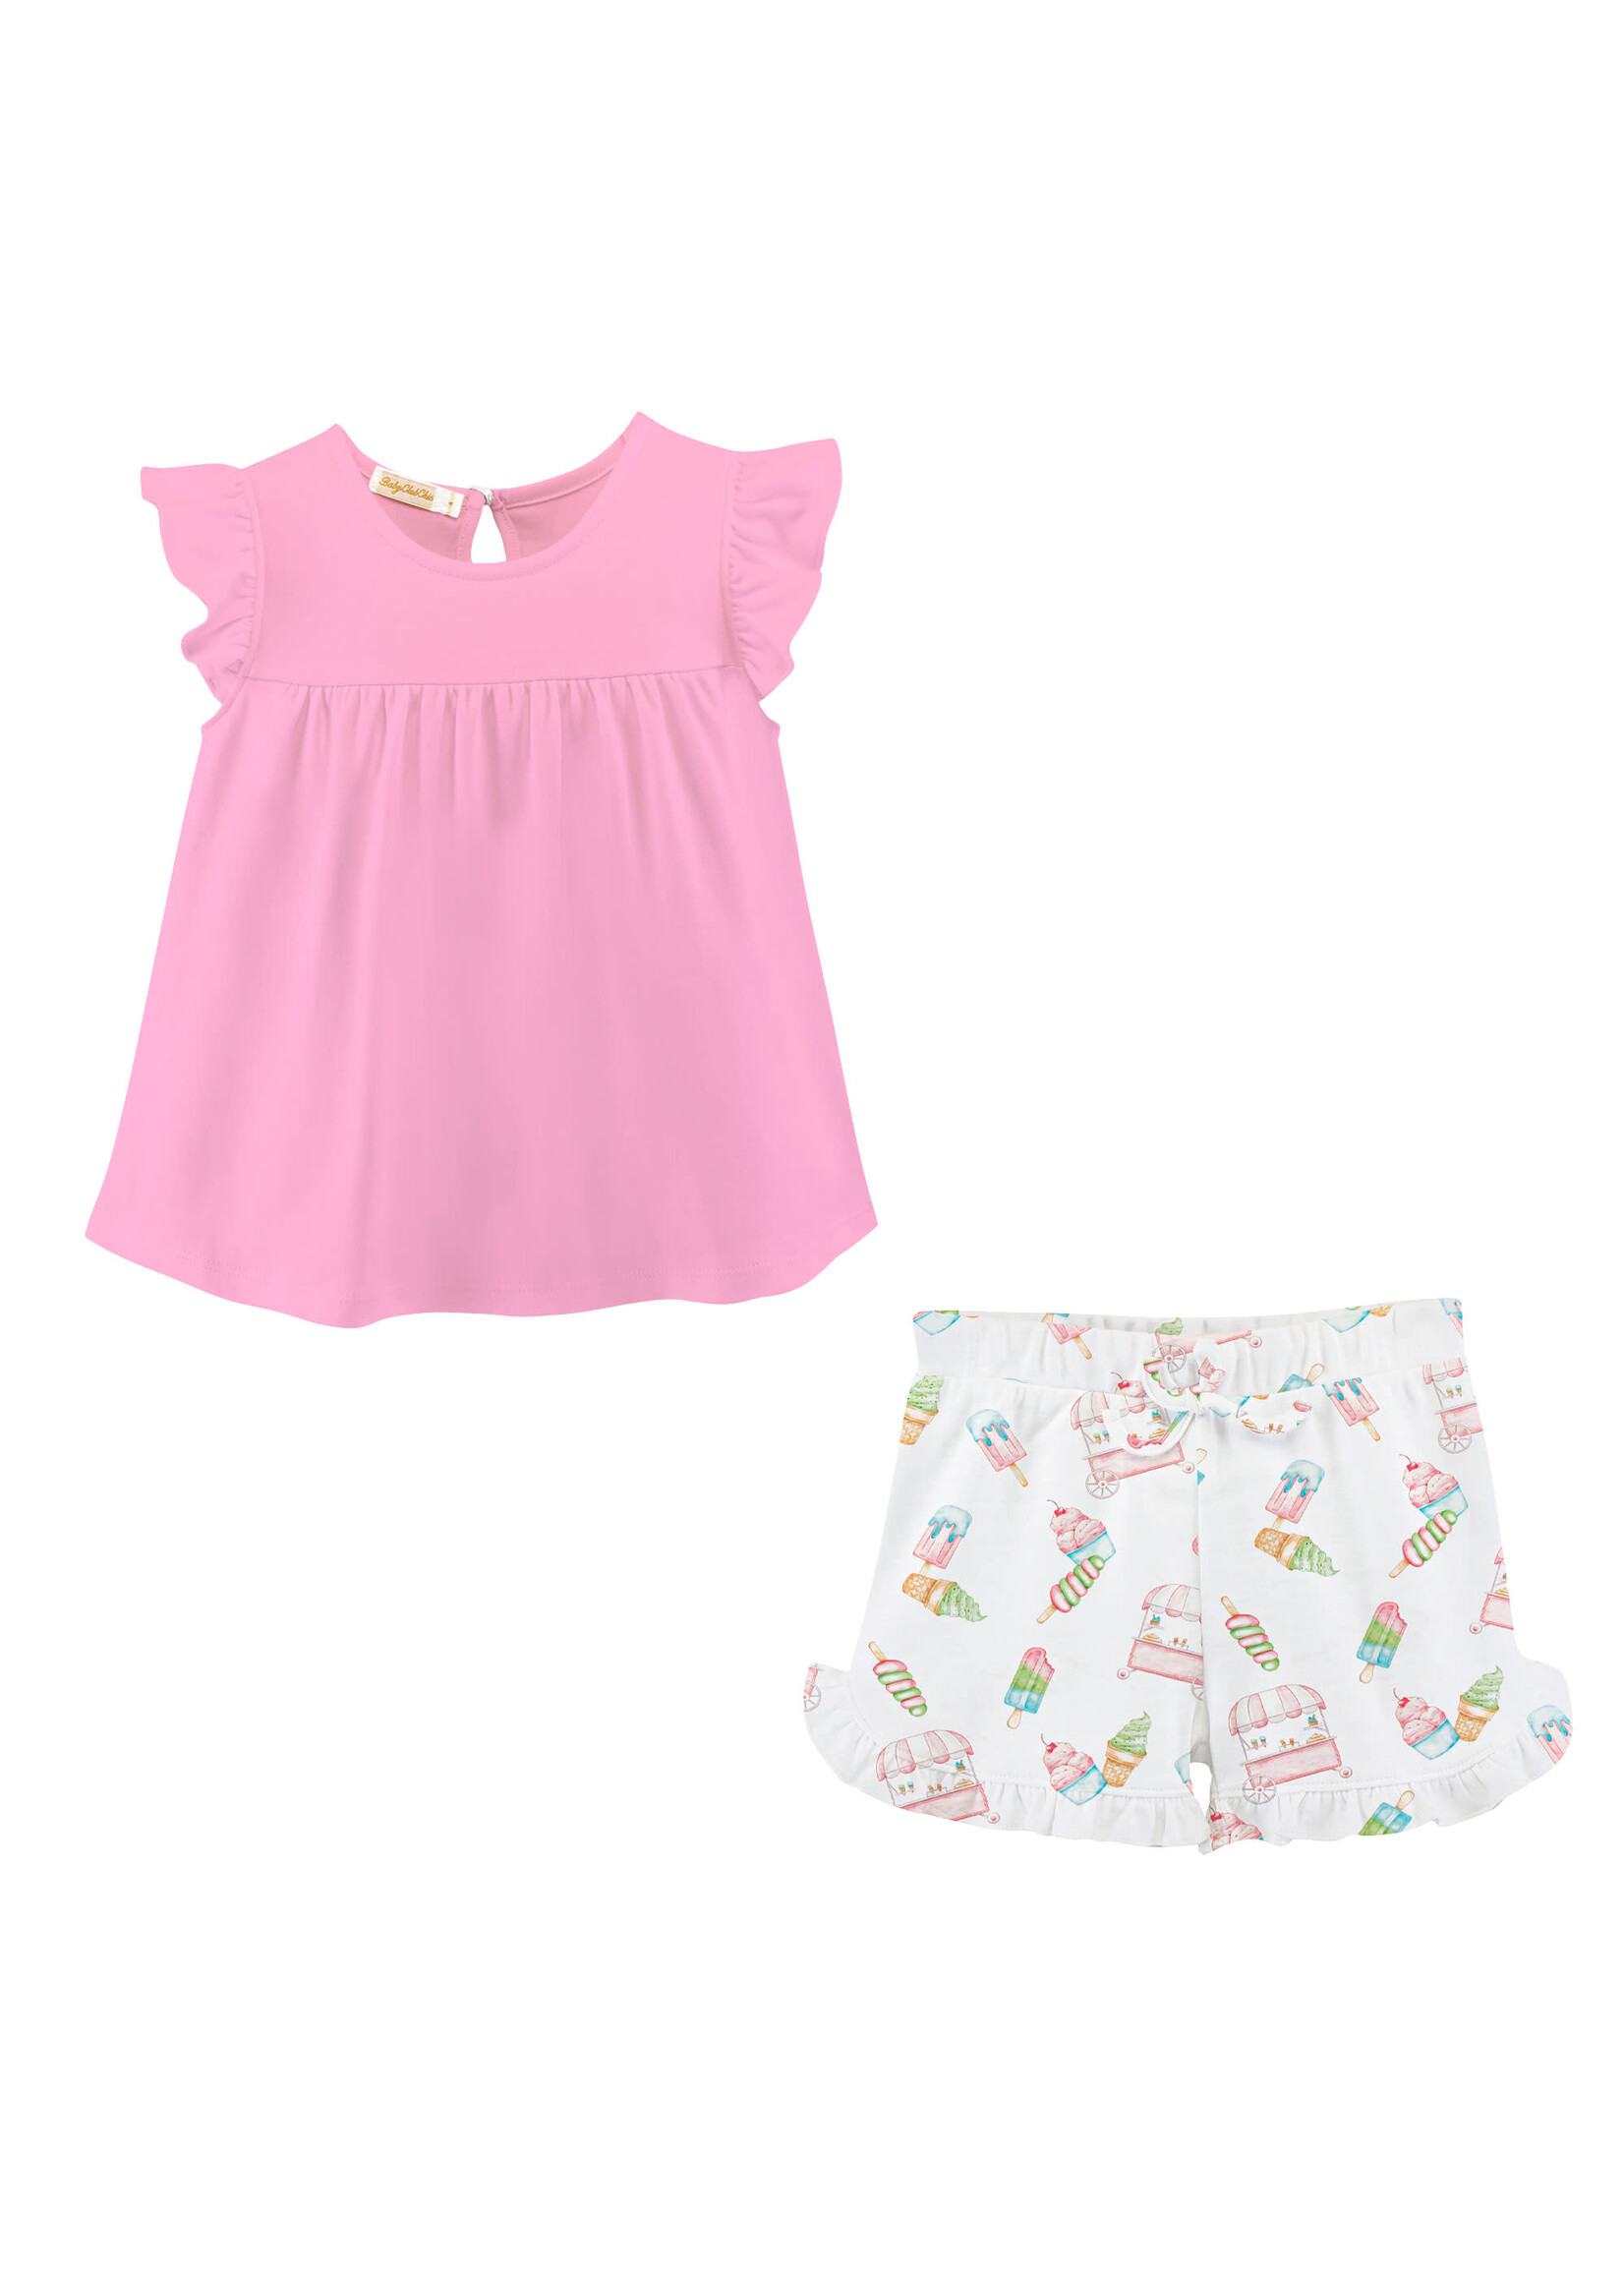 Baby Club Chic Icepops Tee and Short Set